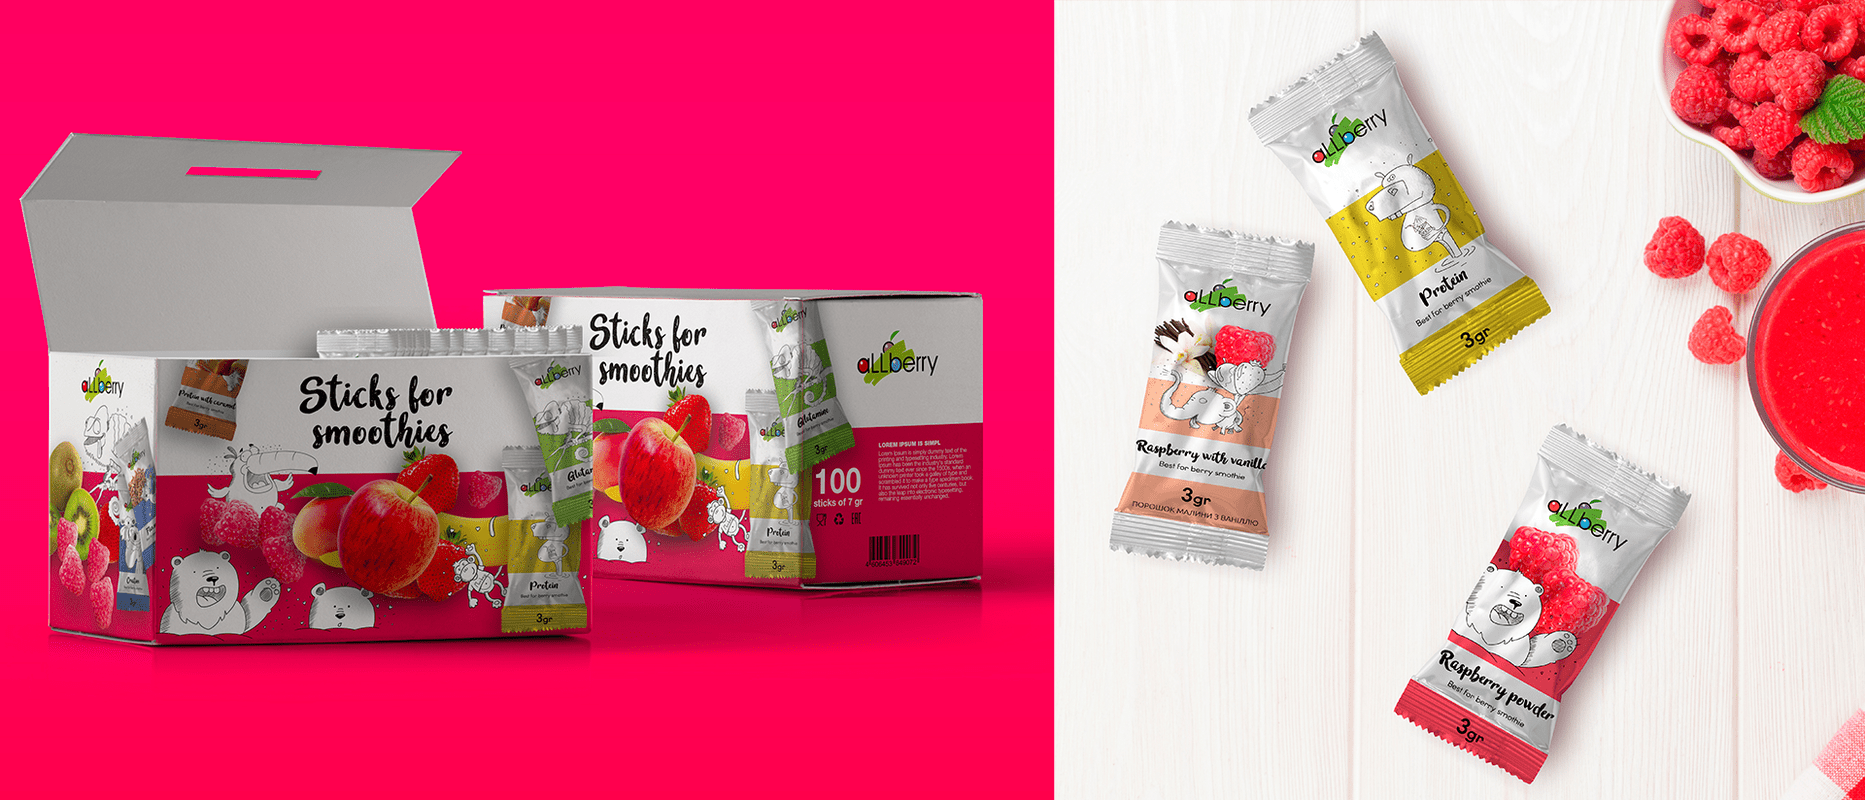 Case: website, marketing kit, packaging, video, promotional materials for Allberry — Rubarb - Image - 7